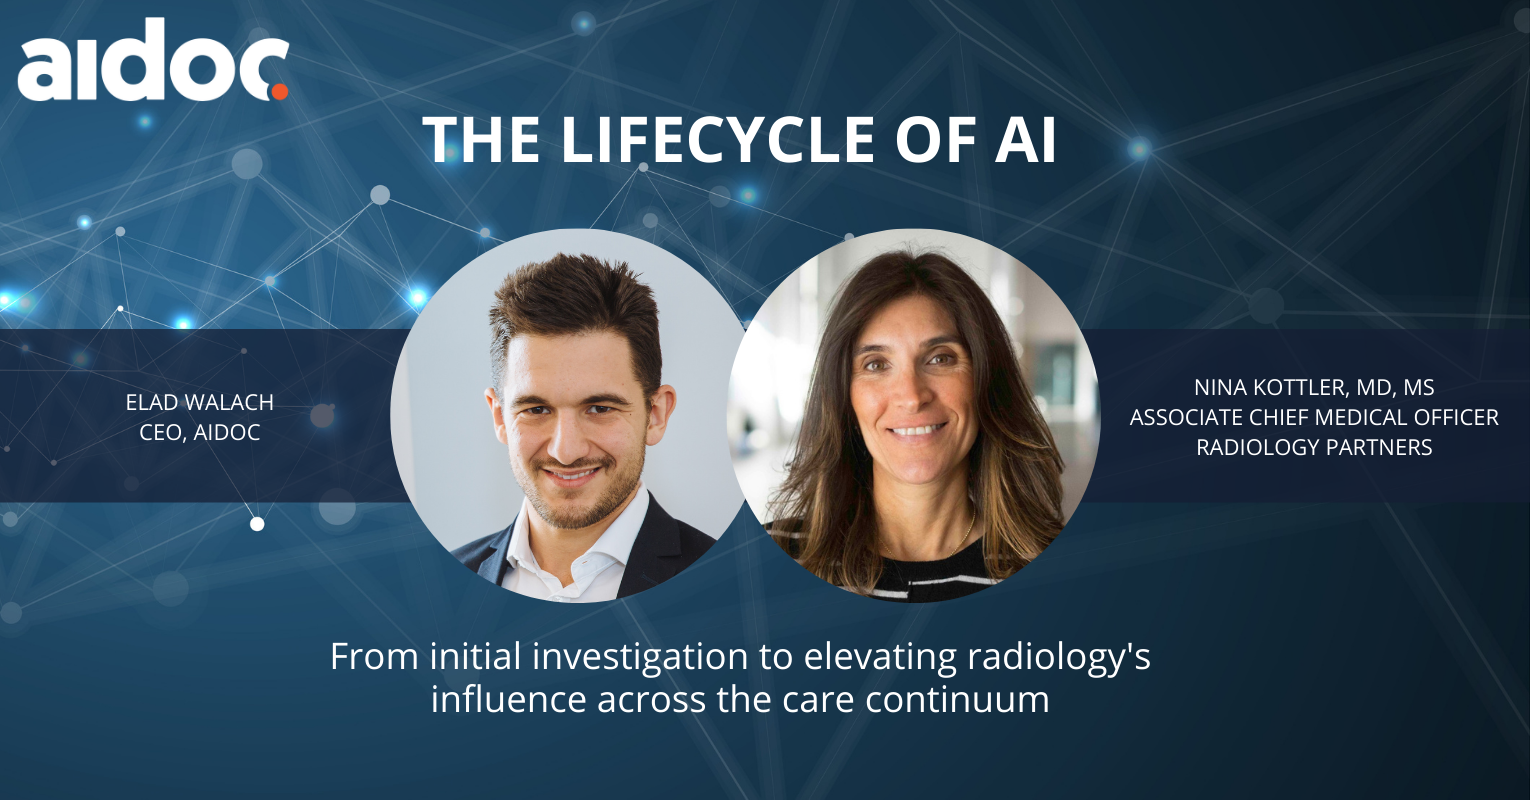 The Lifecycle of AI webinar